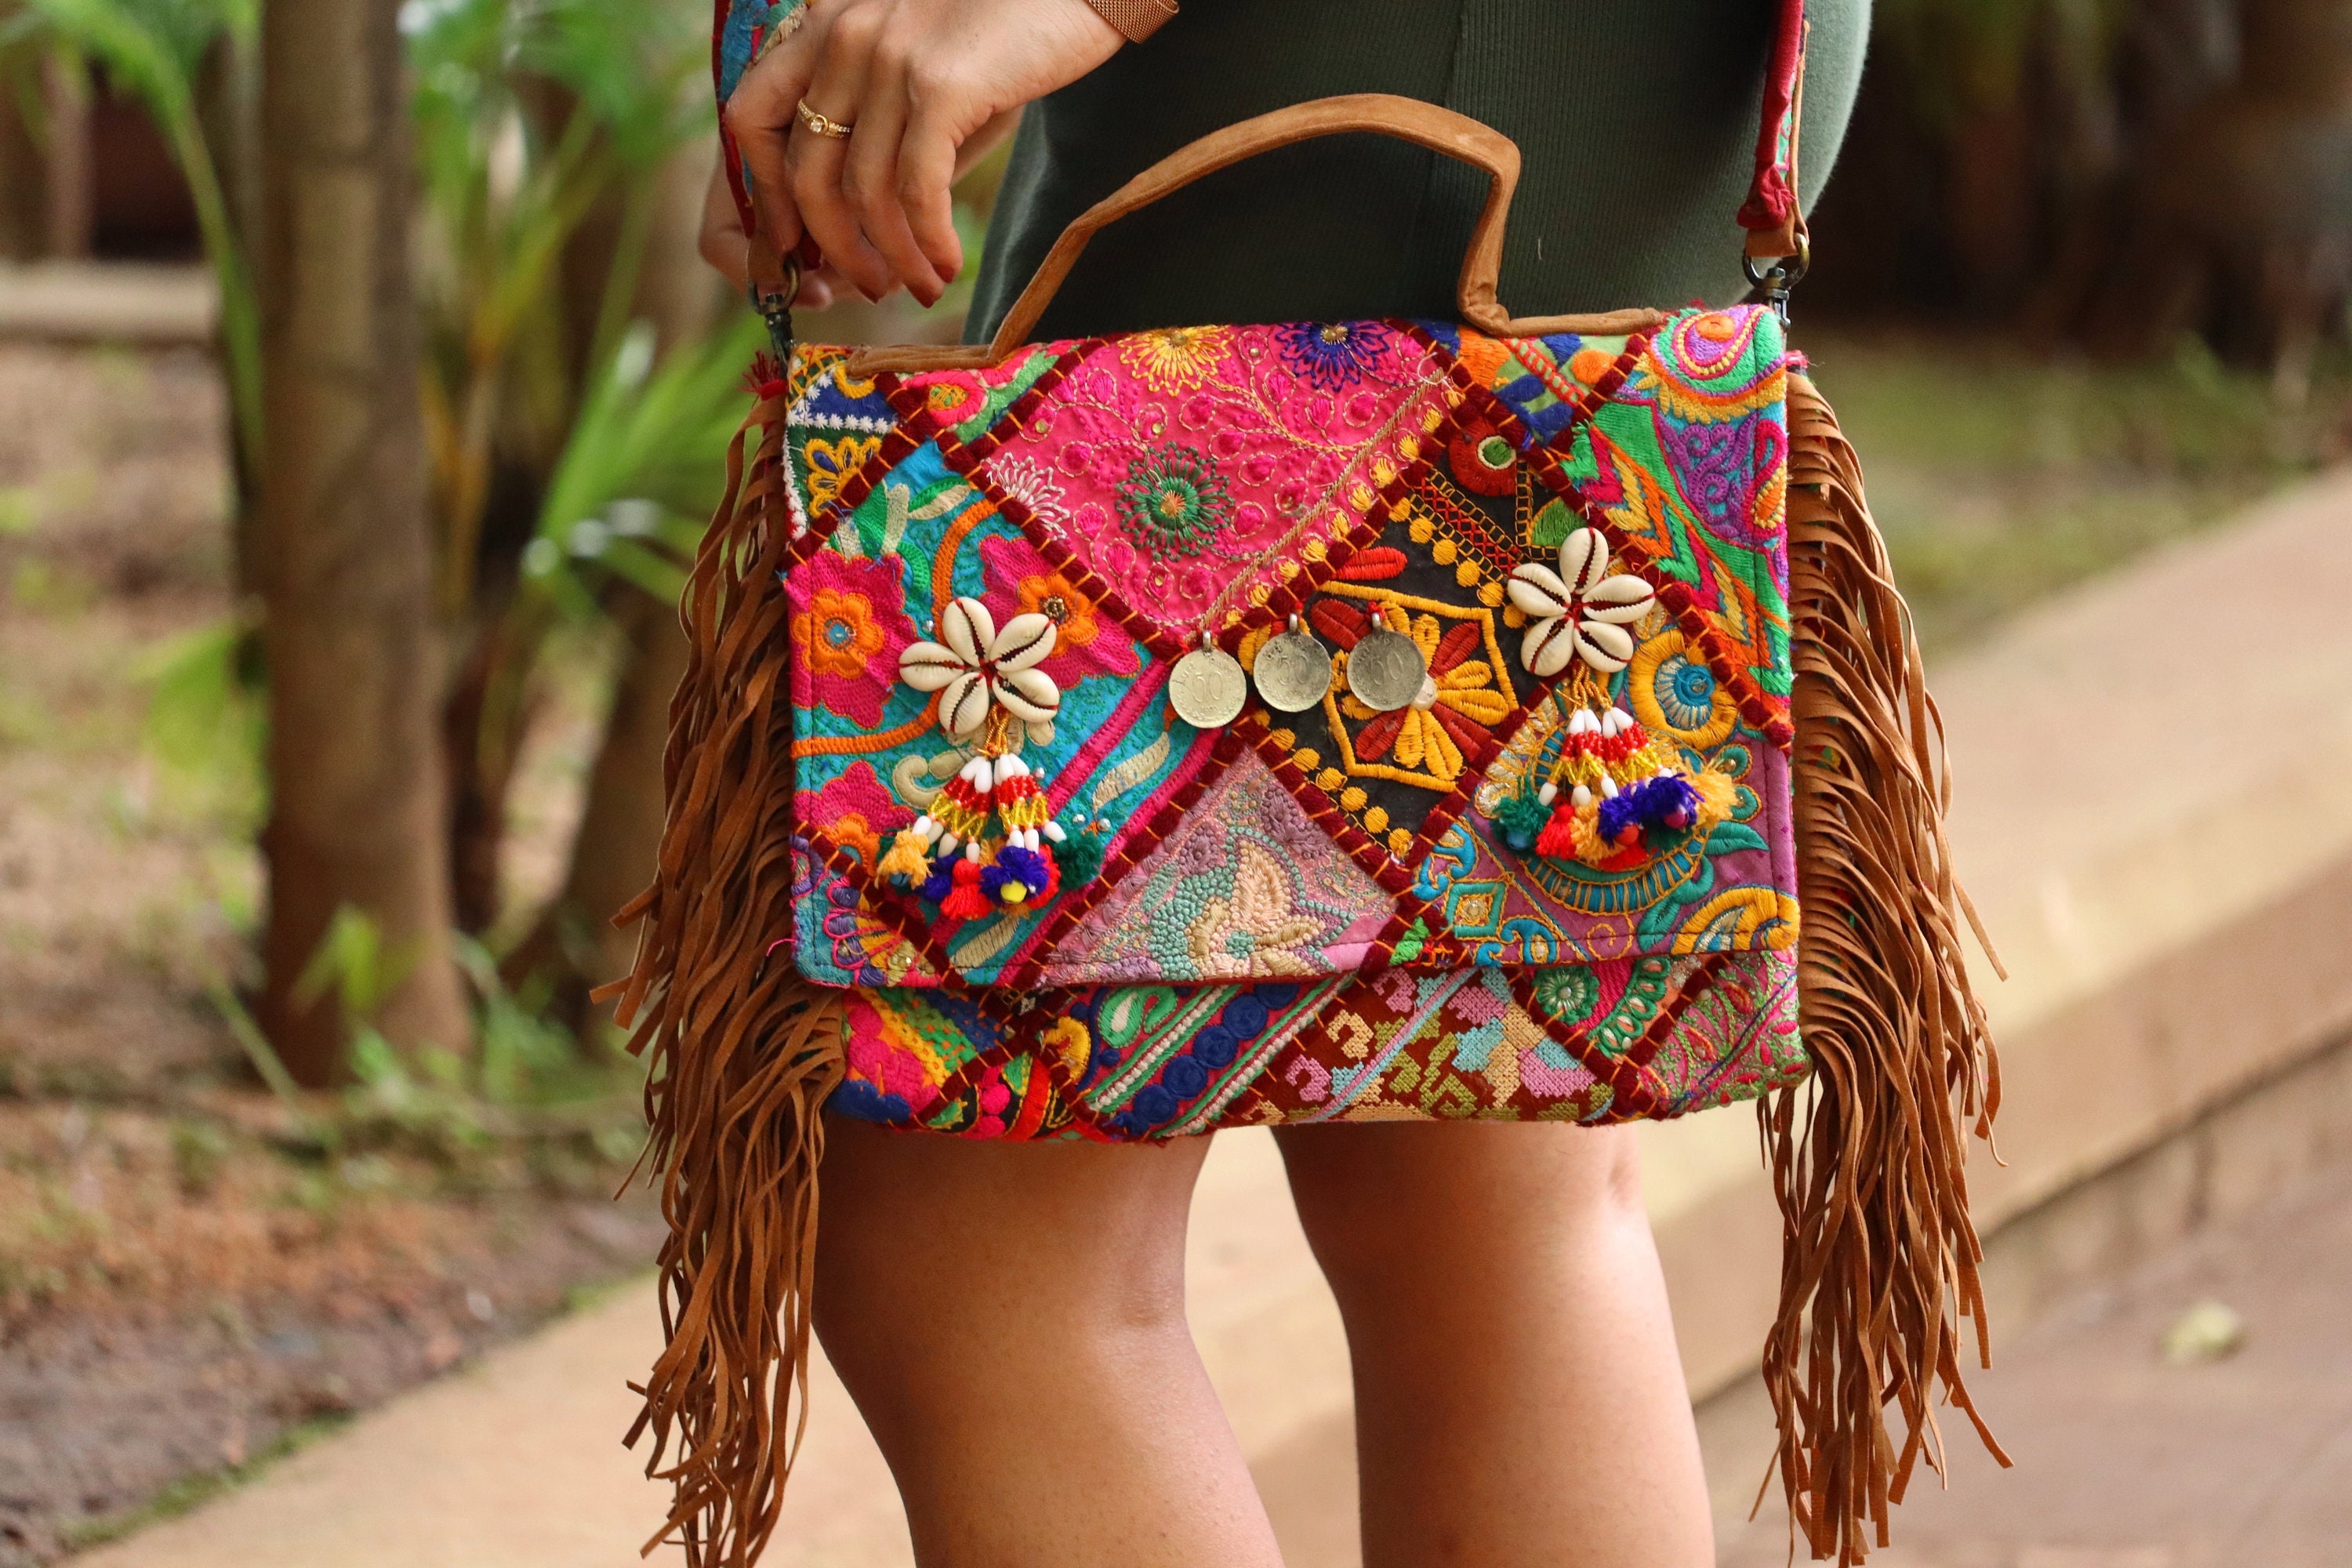 Where to shop for those amazing bohemian bags online?